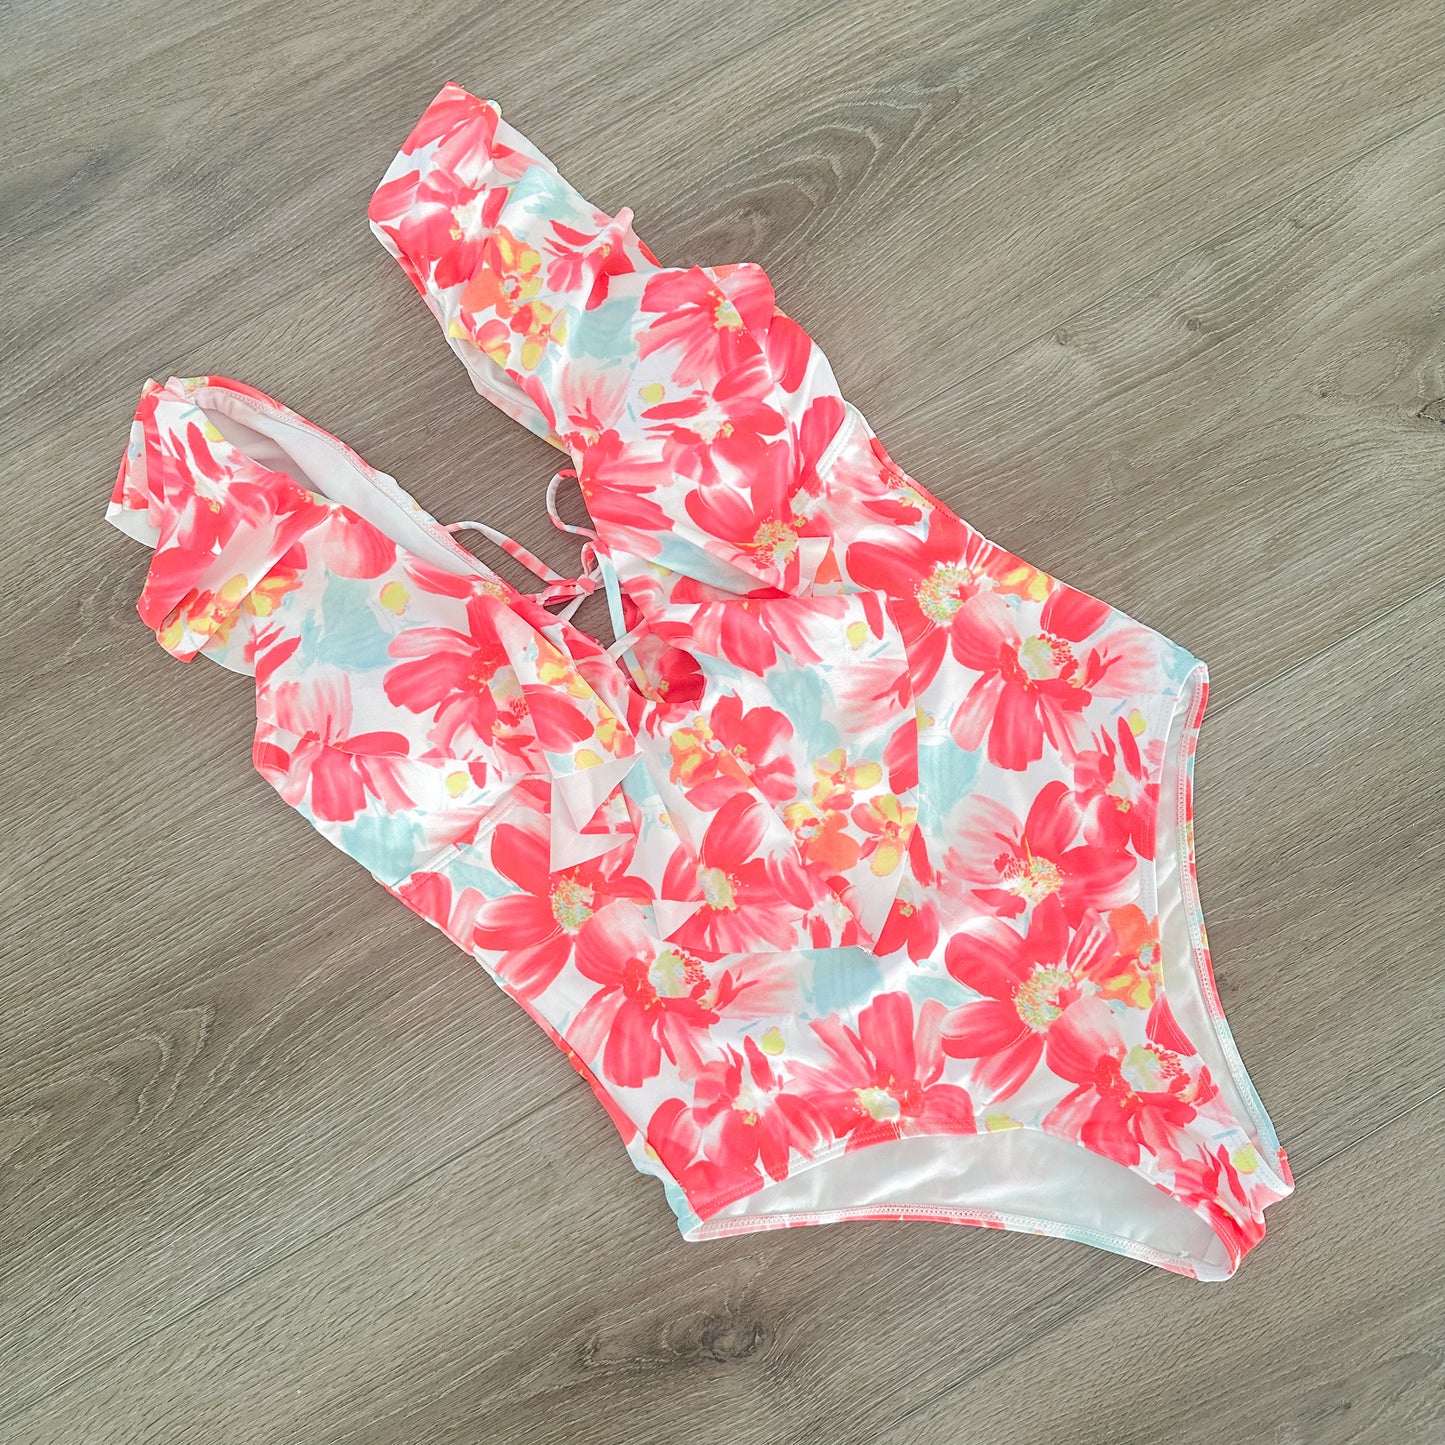 Sporlike Pink Floral Ruffle One Piece Swimsuit Size Large